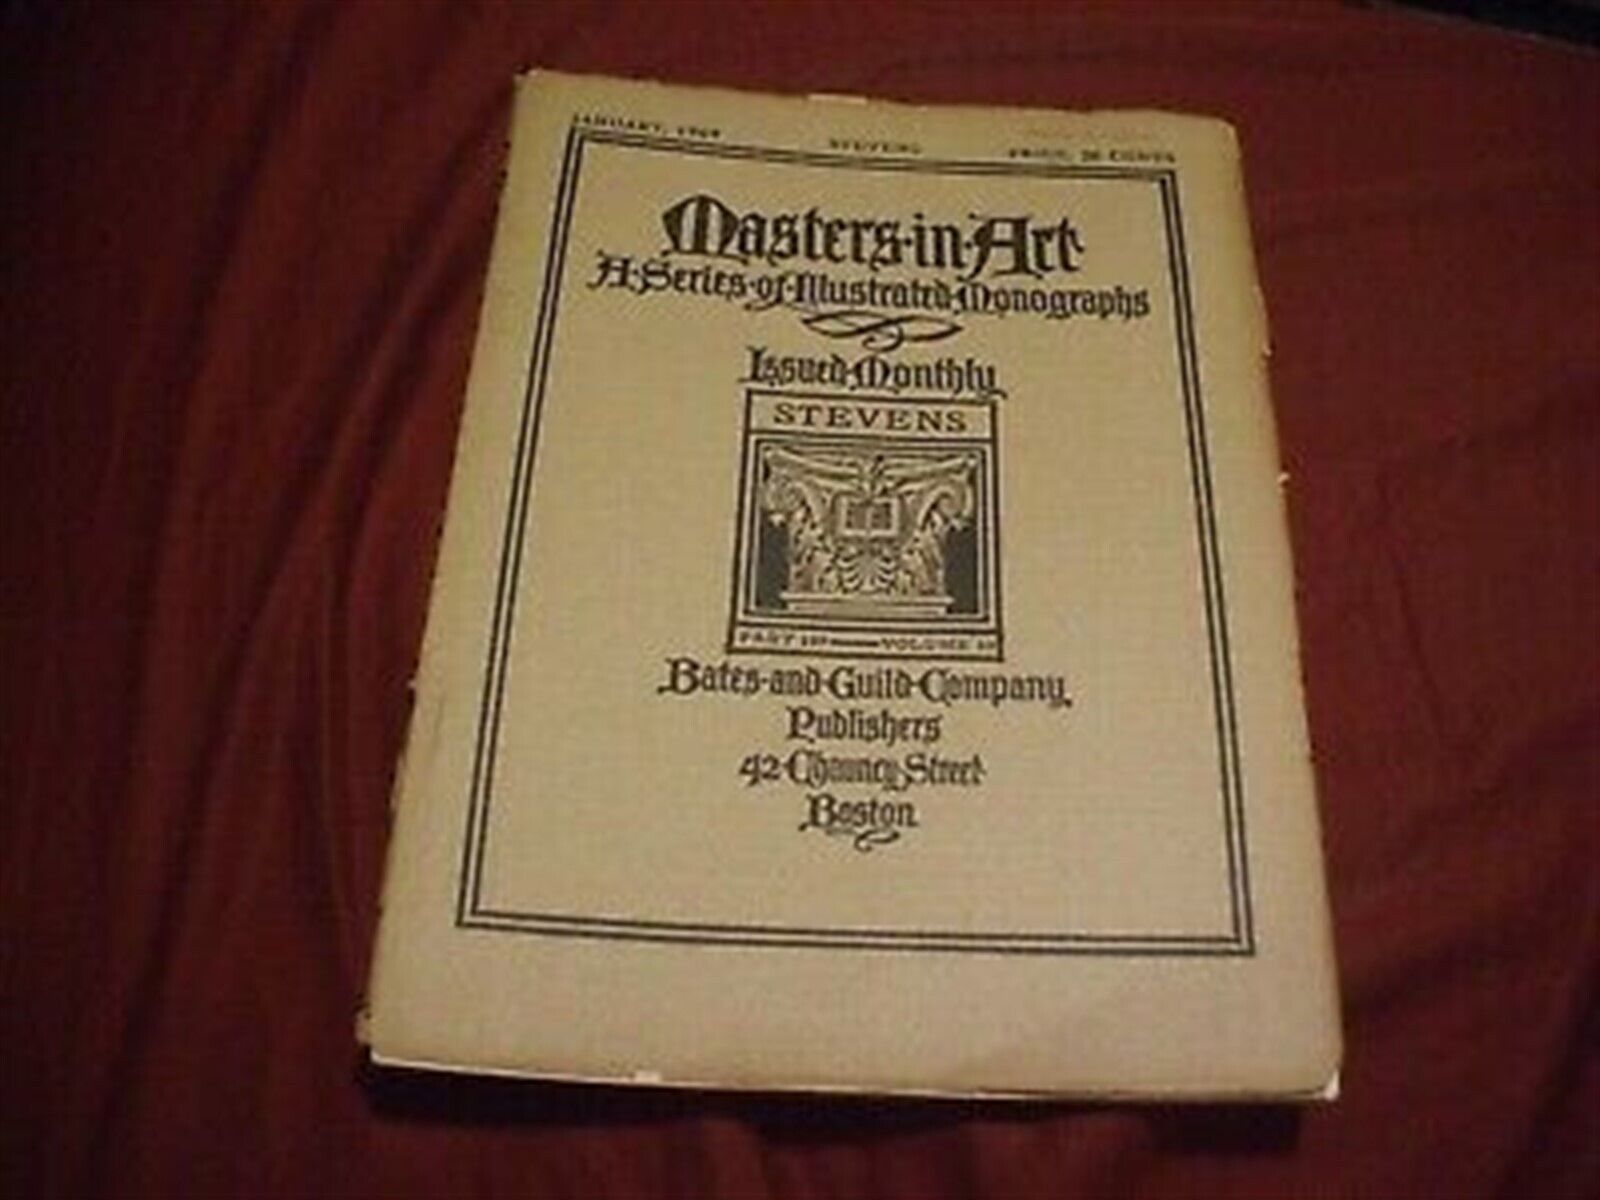 MASTERS IN ART - A SERIES OF ILLUSTRATED MONOGRAPHS Magazine - JANUARY 1909